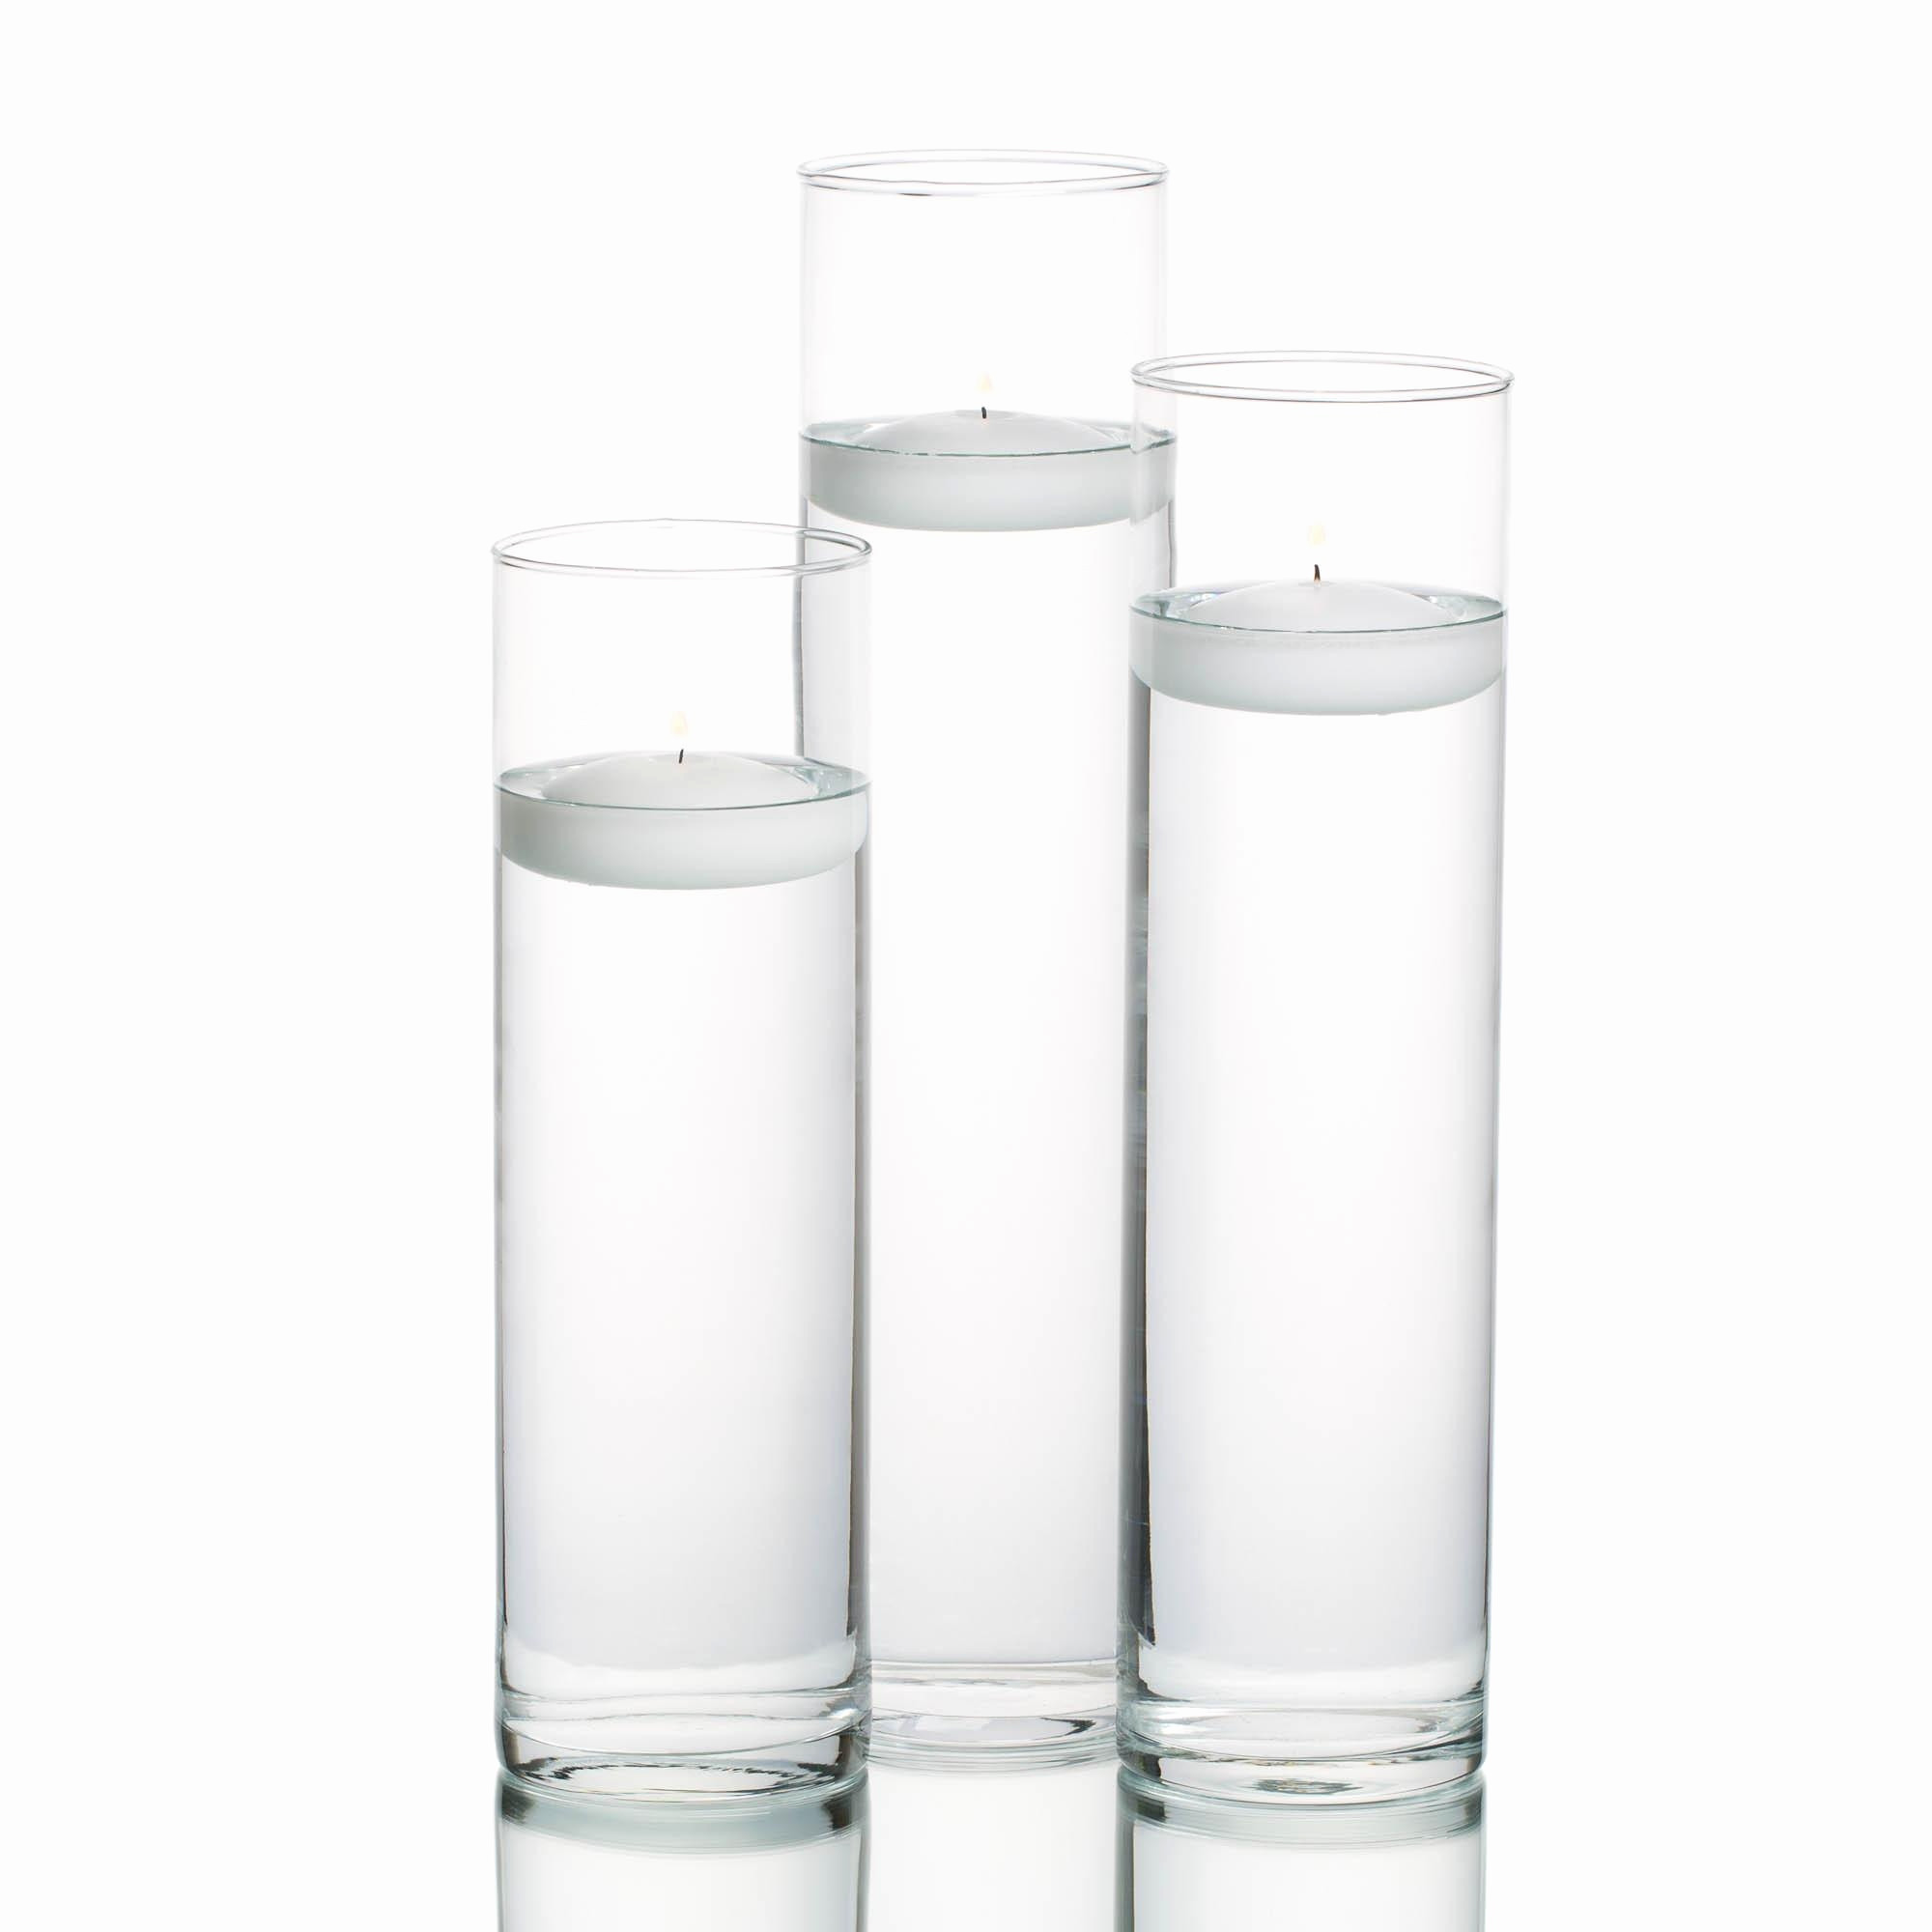 13 Stylish Clear Glass Cylinder Vases Cheap 2024 free download clear glass cylinder vases cheap of 36 luxury white living room image living room decor ideas throughout glass for kitchen cabinets new living room white floor vase luxury h vases oversized 